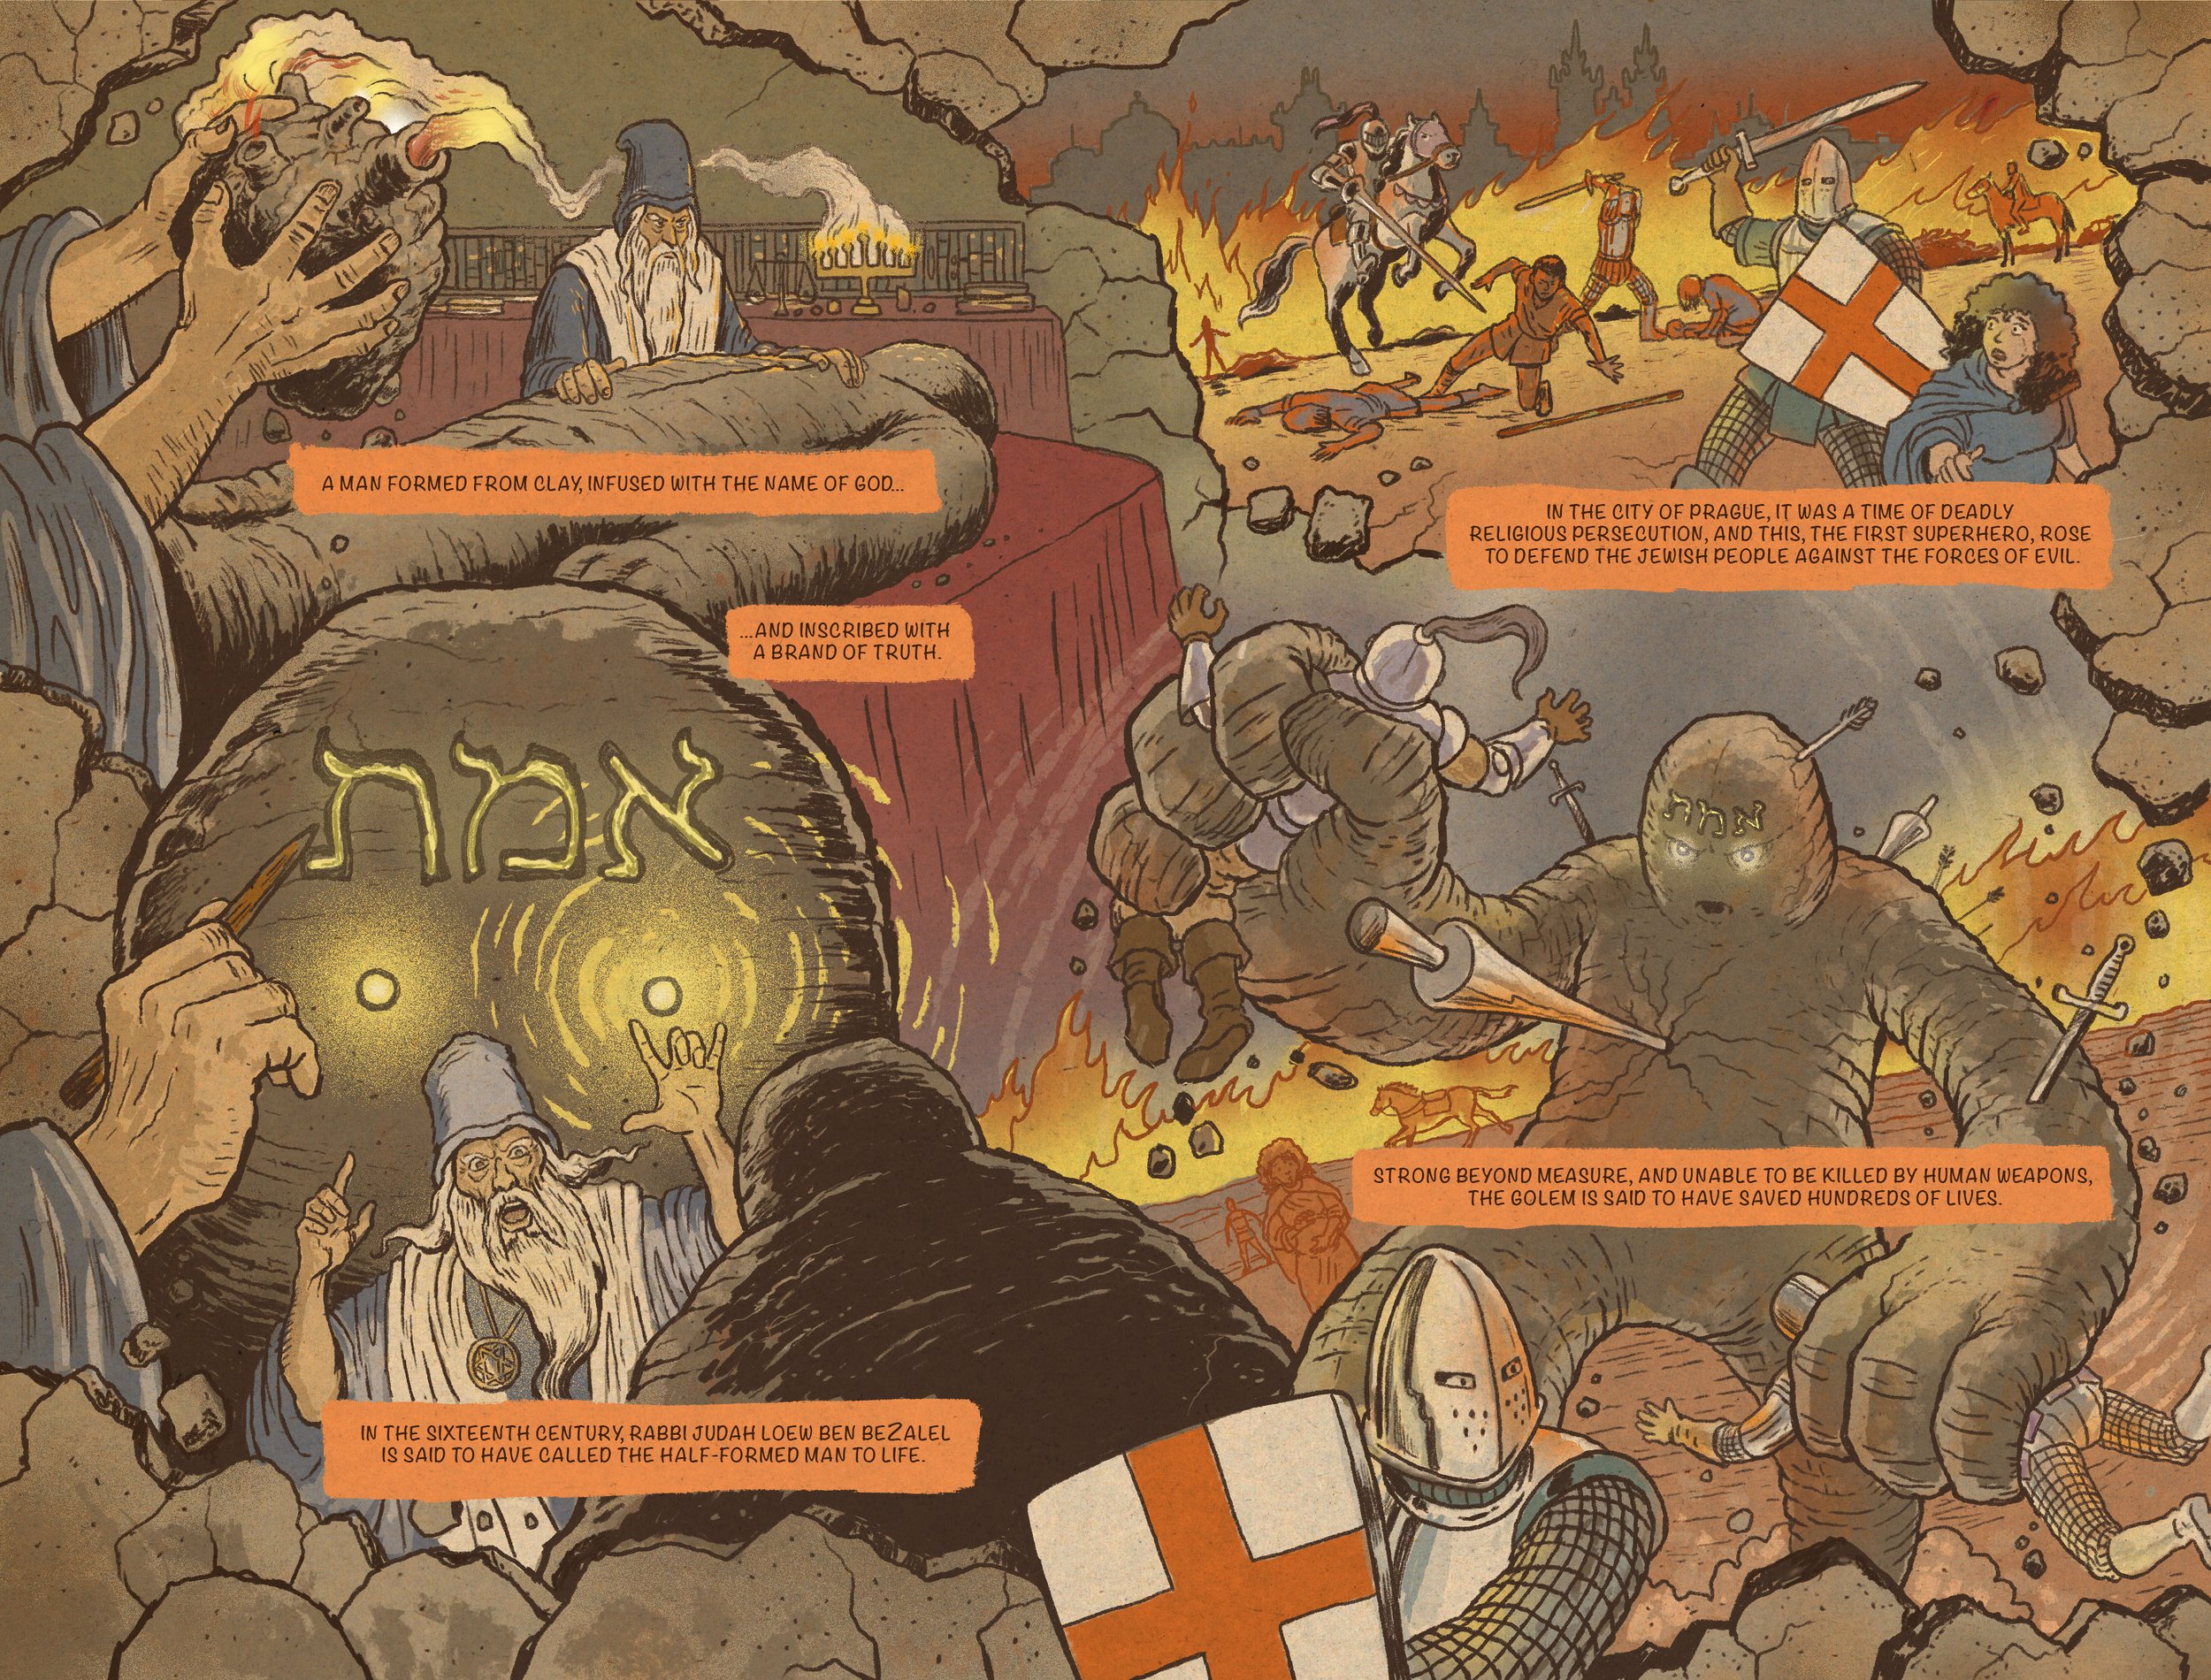 CTD-CH 2-THE GOLEM OF AUSCHWITZ-page 58-59 COLOR.jpg